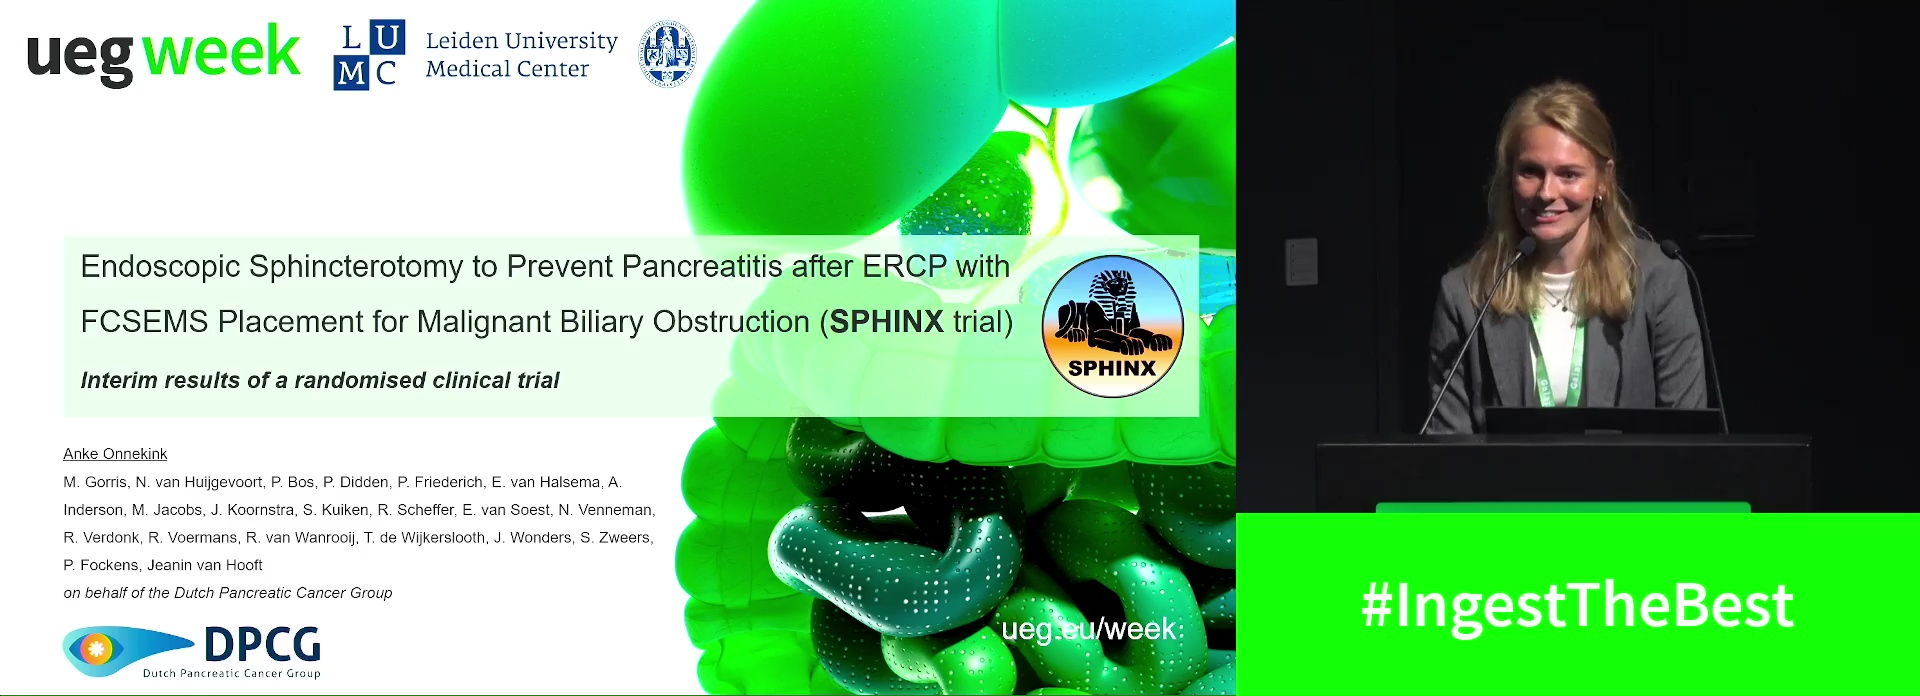 ENDOSCOPIC SPHINCTEROTOMY TO PREVENT PANCREATITIS AFTER SELF-EXPANDABLE METAL STENT PLACEMENT IN EXTRAHEPATIC MALIGNANT BILIARY OBSTRUCTION (SPHINX): INTERIM-RESULTS OF A MULTICENTER, RANDOMIZED CONTROLLED TRIAL